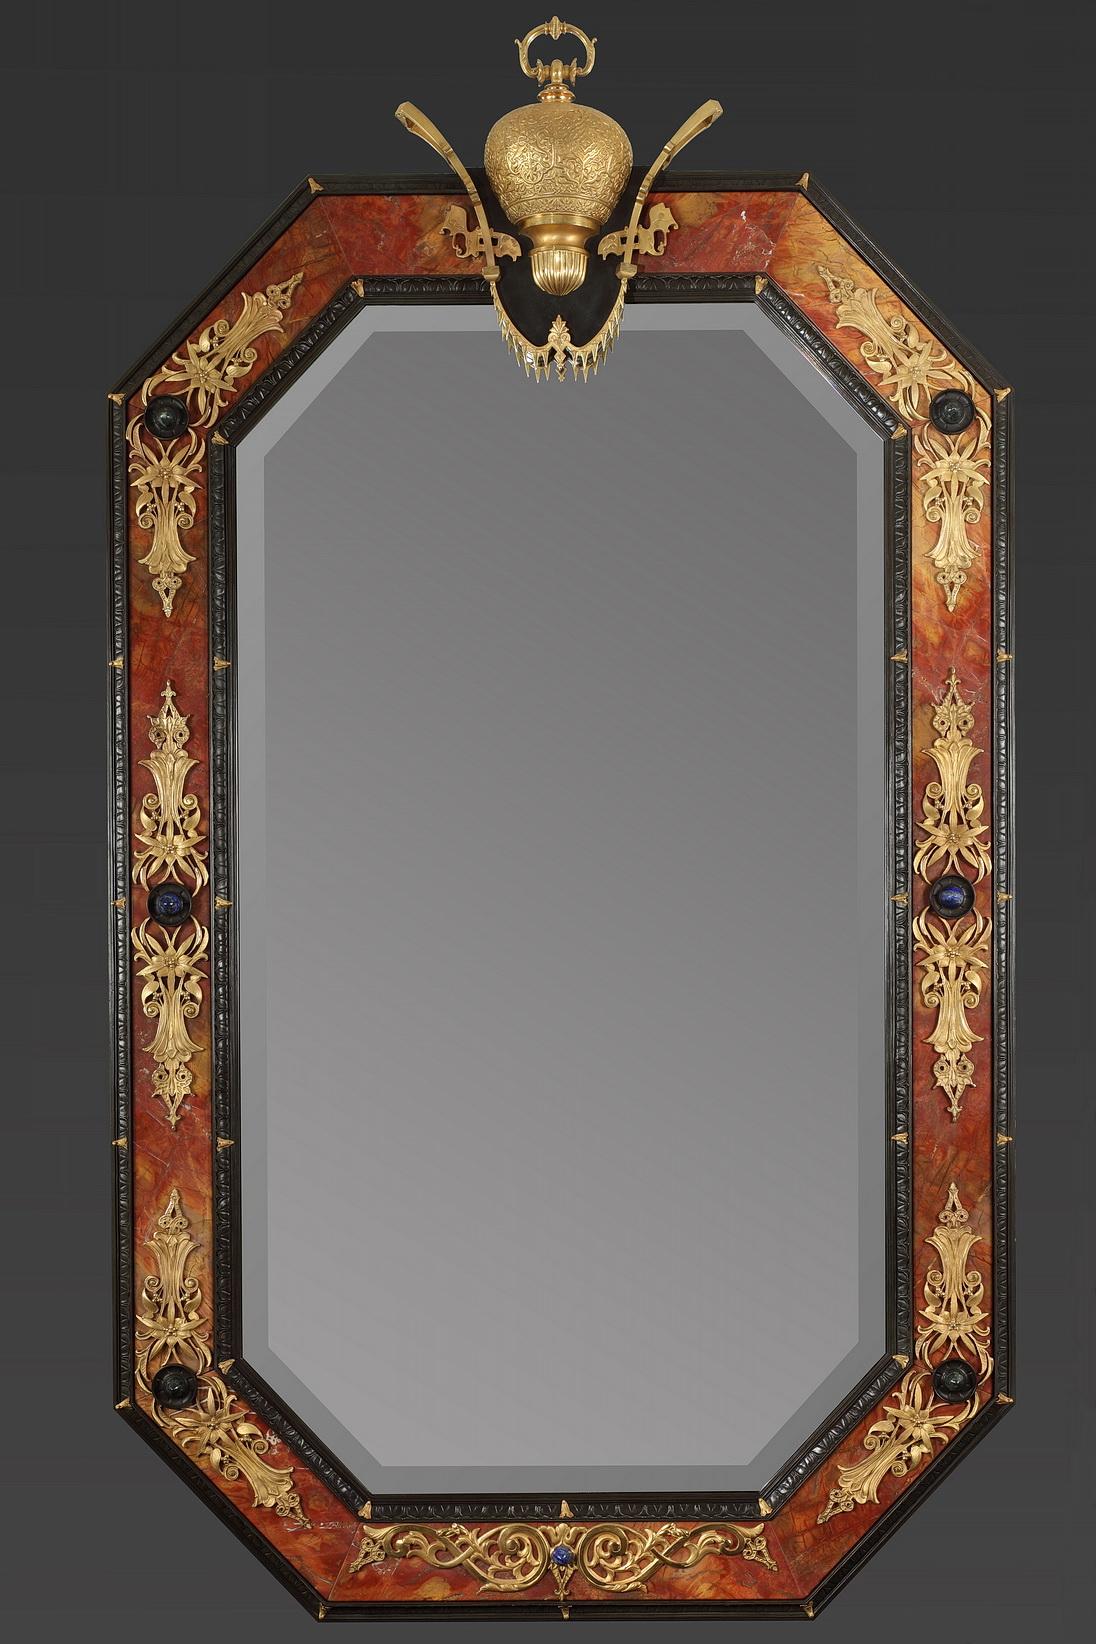 Large octogonal illuminating mirror in rosso antico marble and silvered bronze, decorated with gilt bronze garlands and semi-precious stones such as lapis-lazuli, porphyry.

It is part of a serie of six mirrors, made by our workshops. This one bear